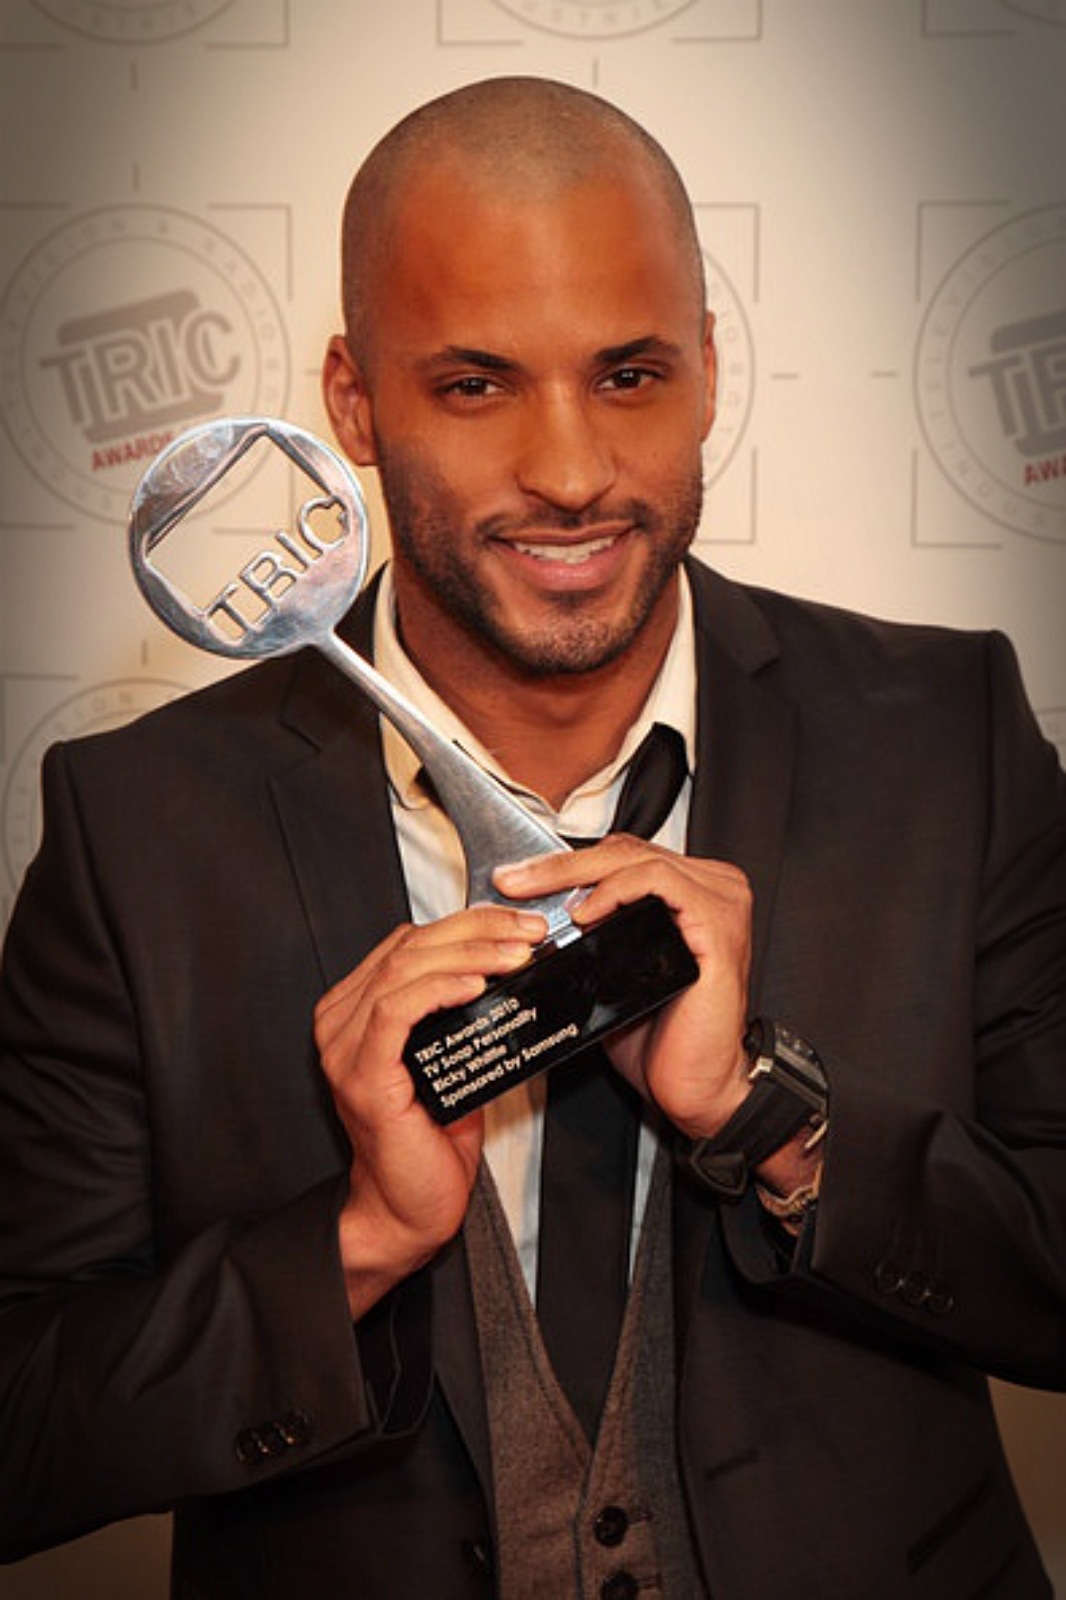 Ricky Whittle receiving TRIC Award 2010